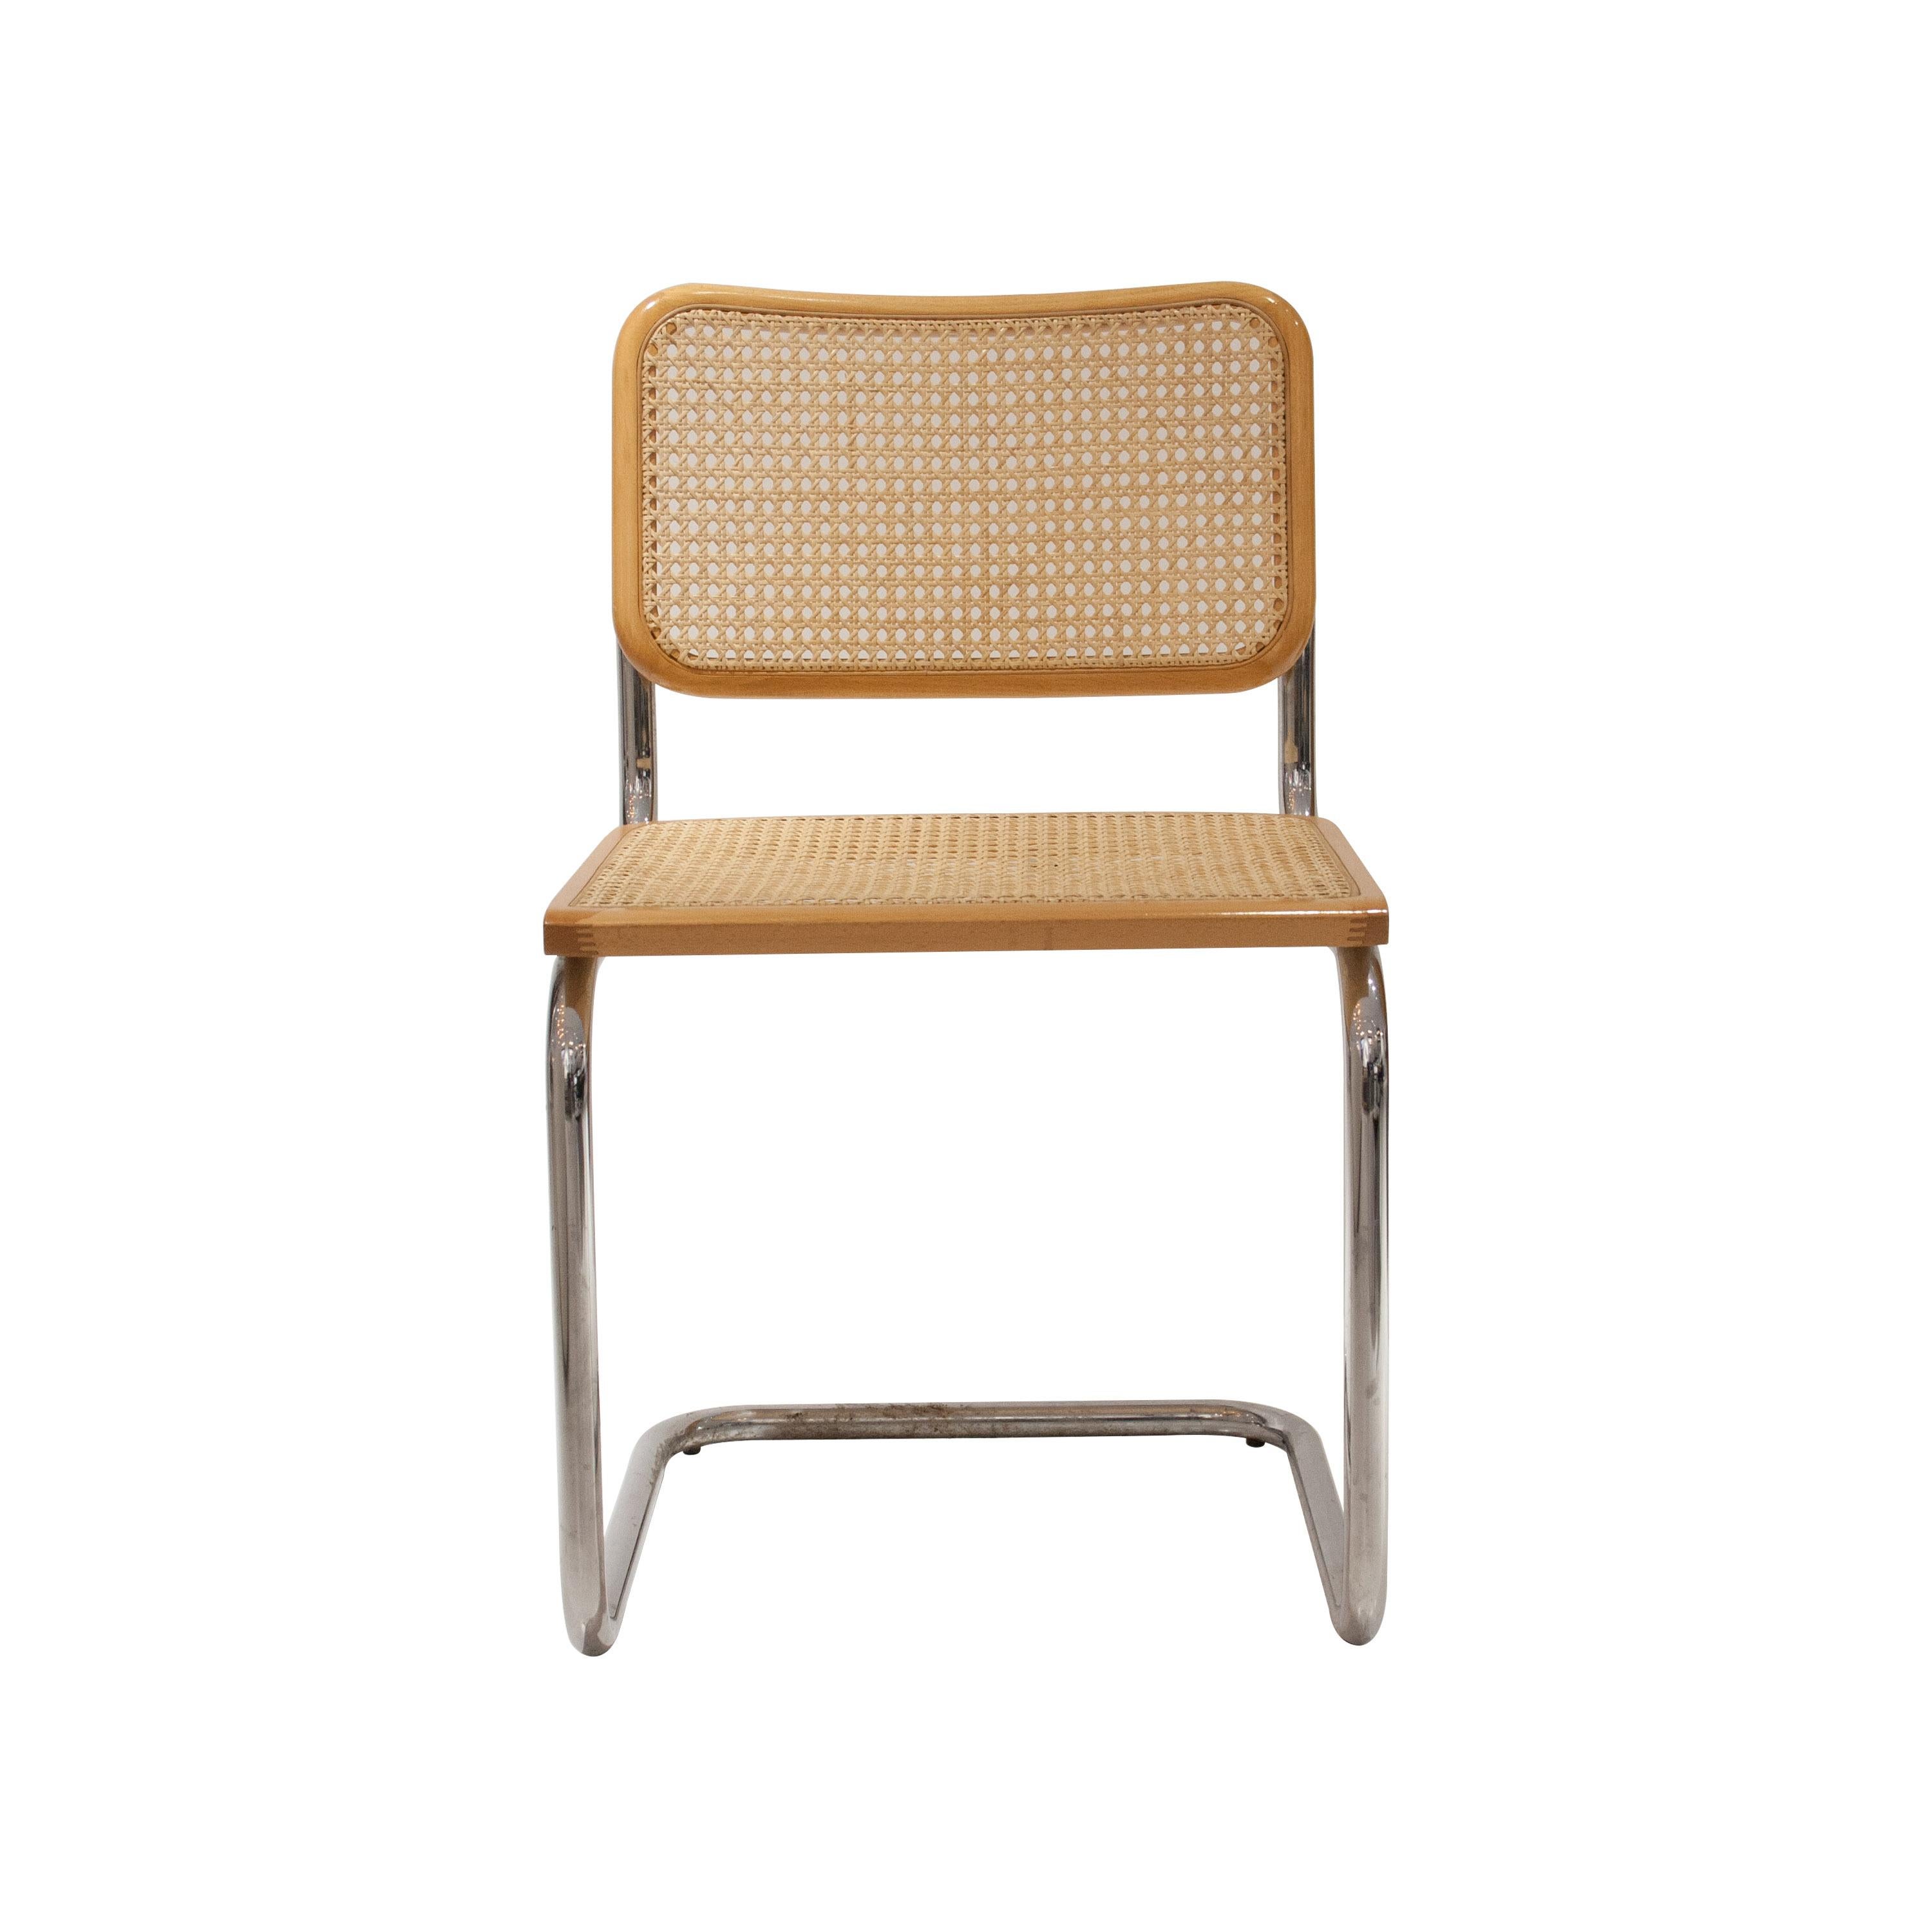 Cesca model chair designed by Marcel Breuer (1902 -1981). Structure made of tubular steel, seat and backrest in beechwood and wicker grating. German design from 1928 and produced in Italy from 1962.